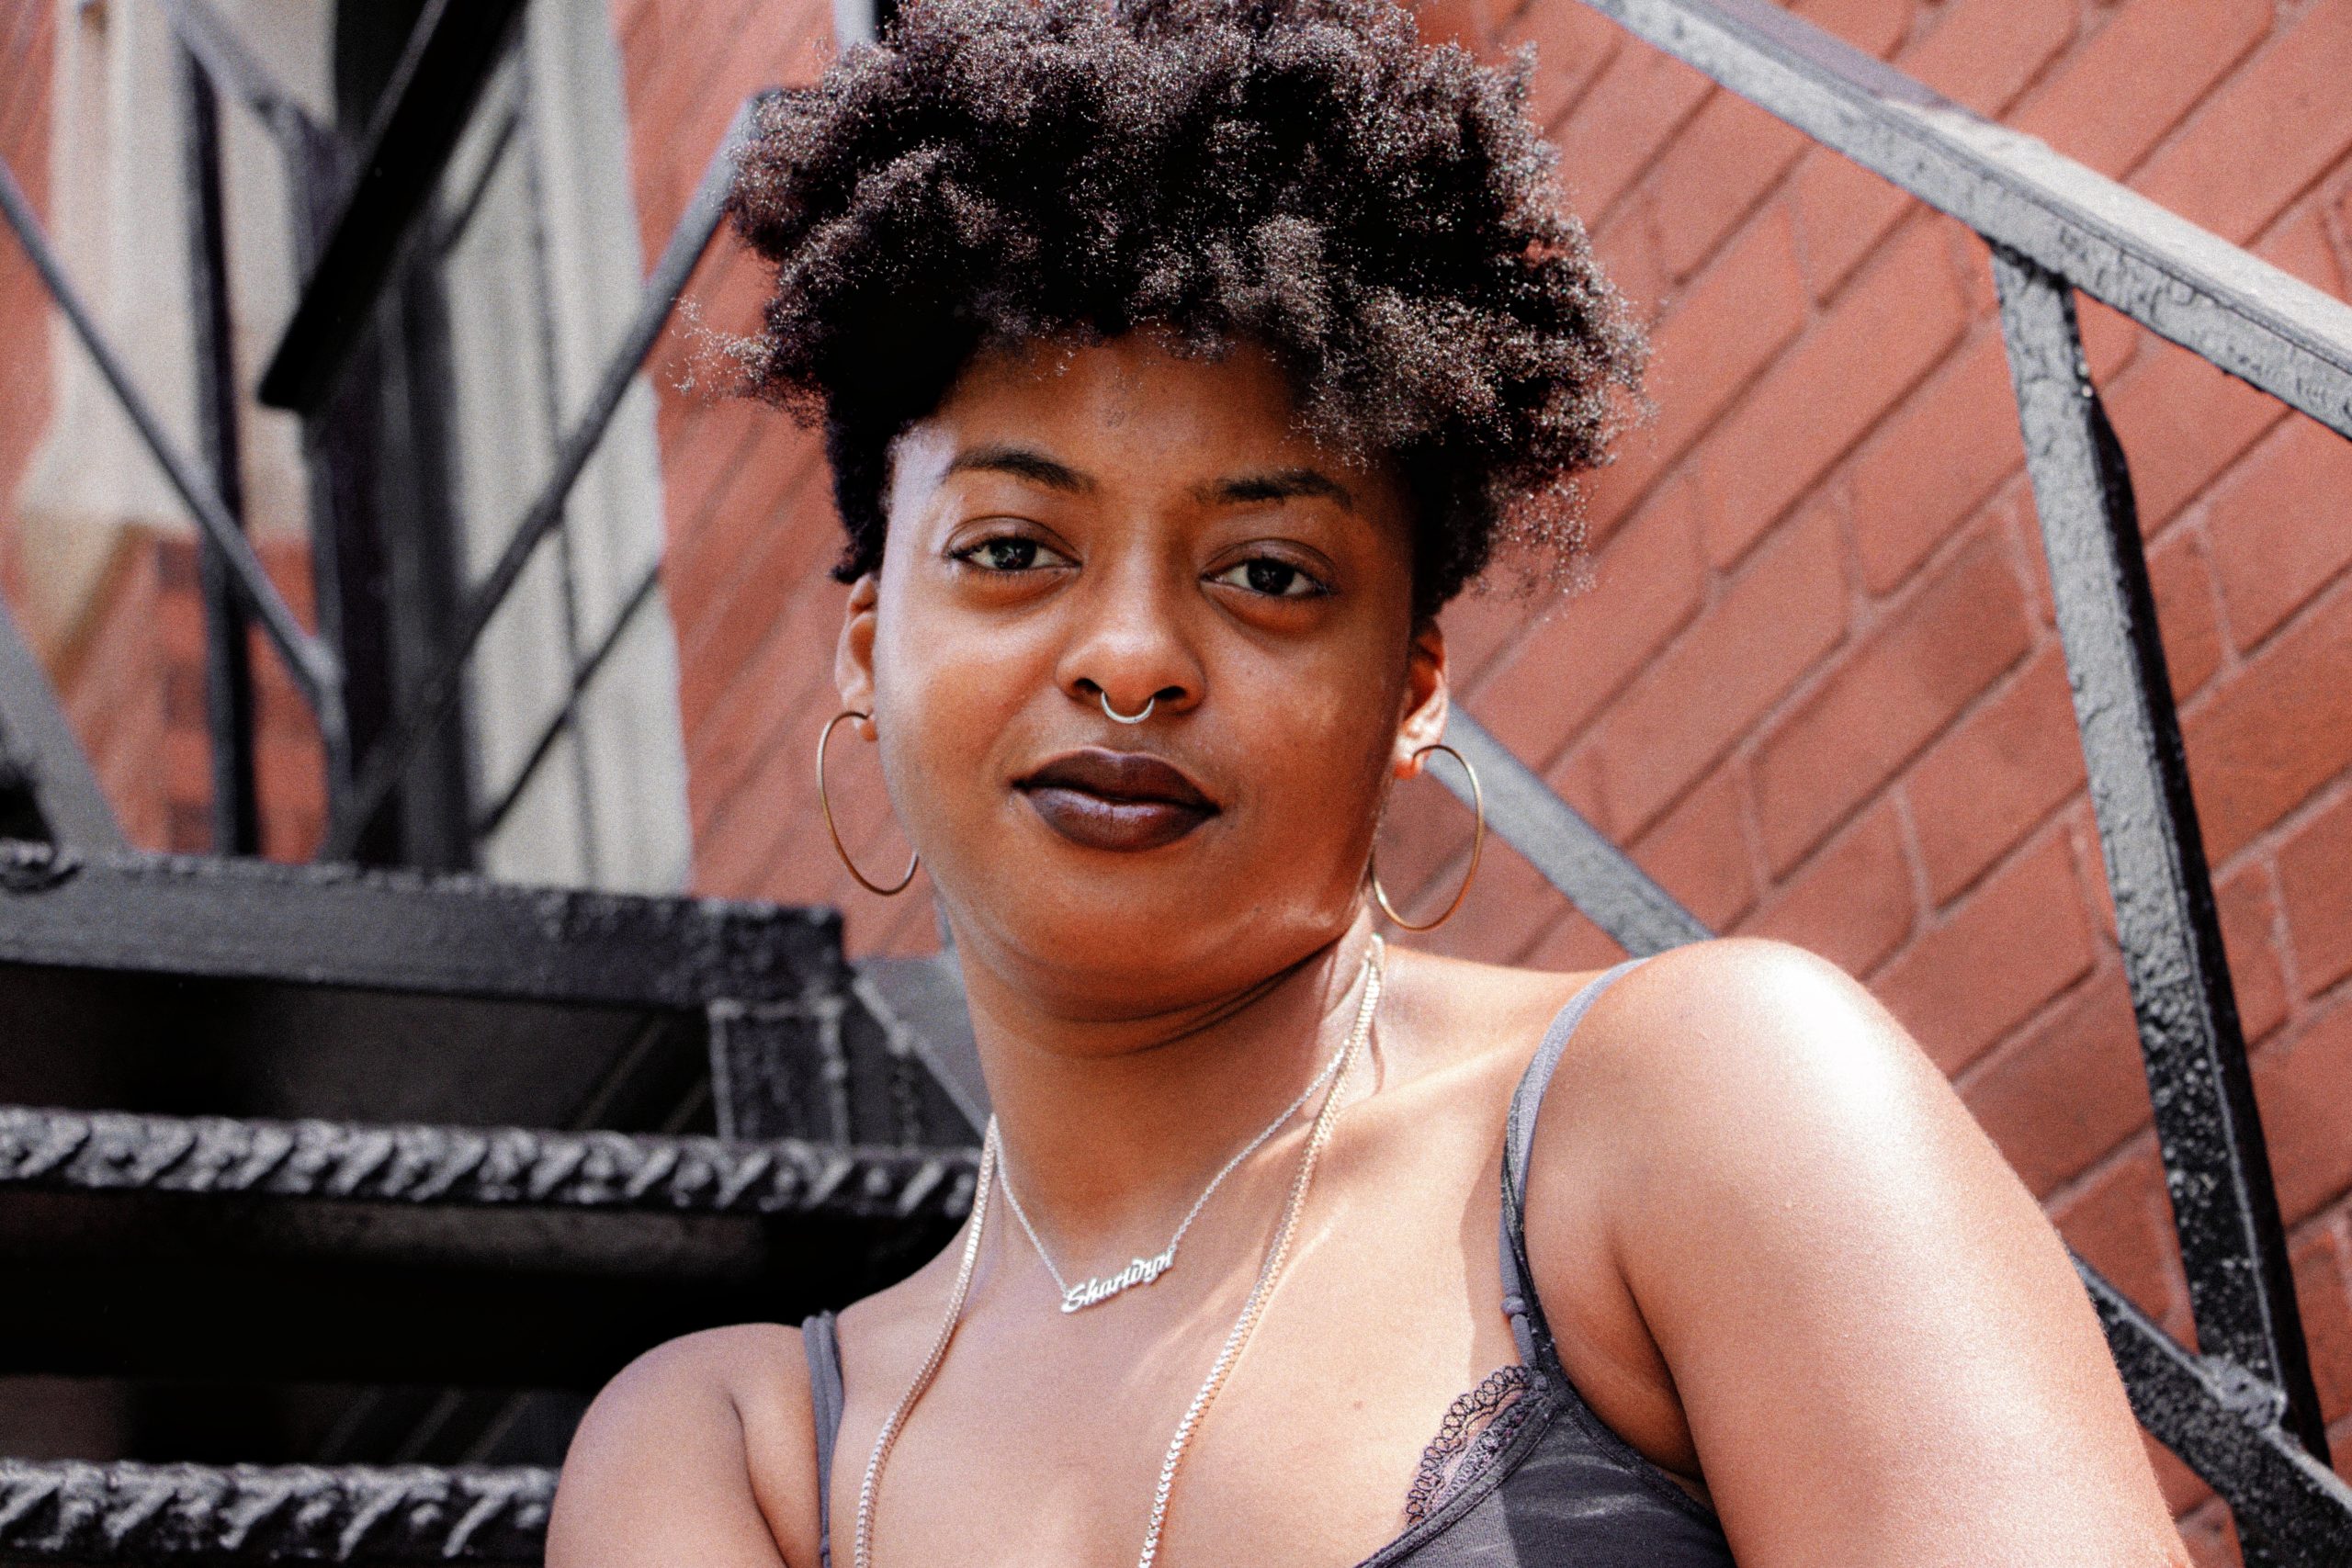 For Painter and Pen Artist Sharidyn Barnes It’s All About The Convo